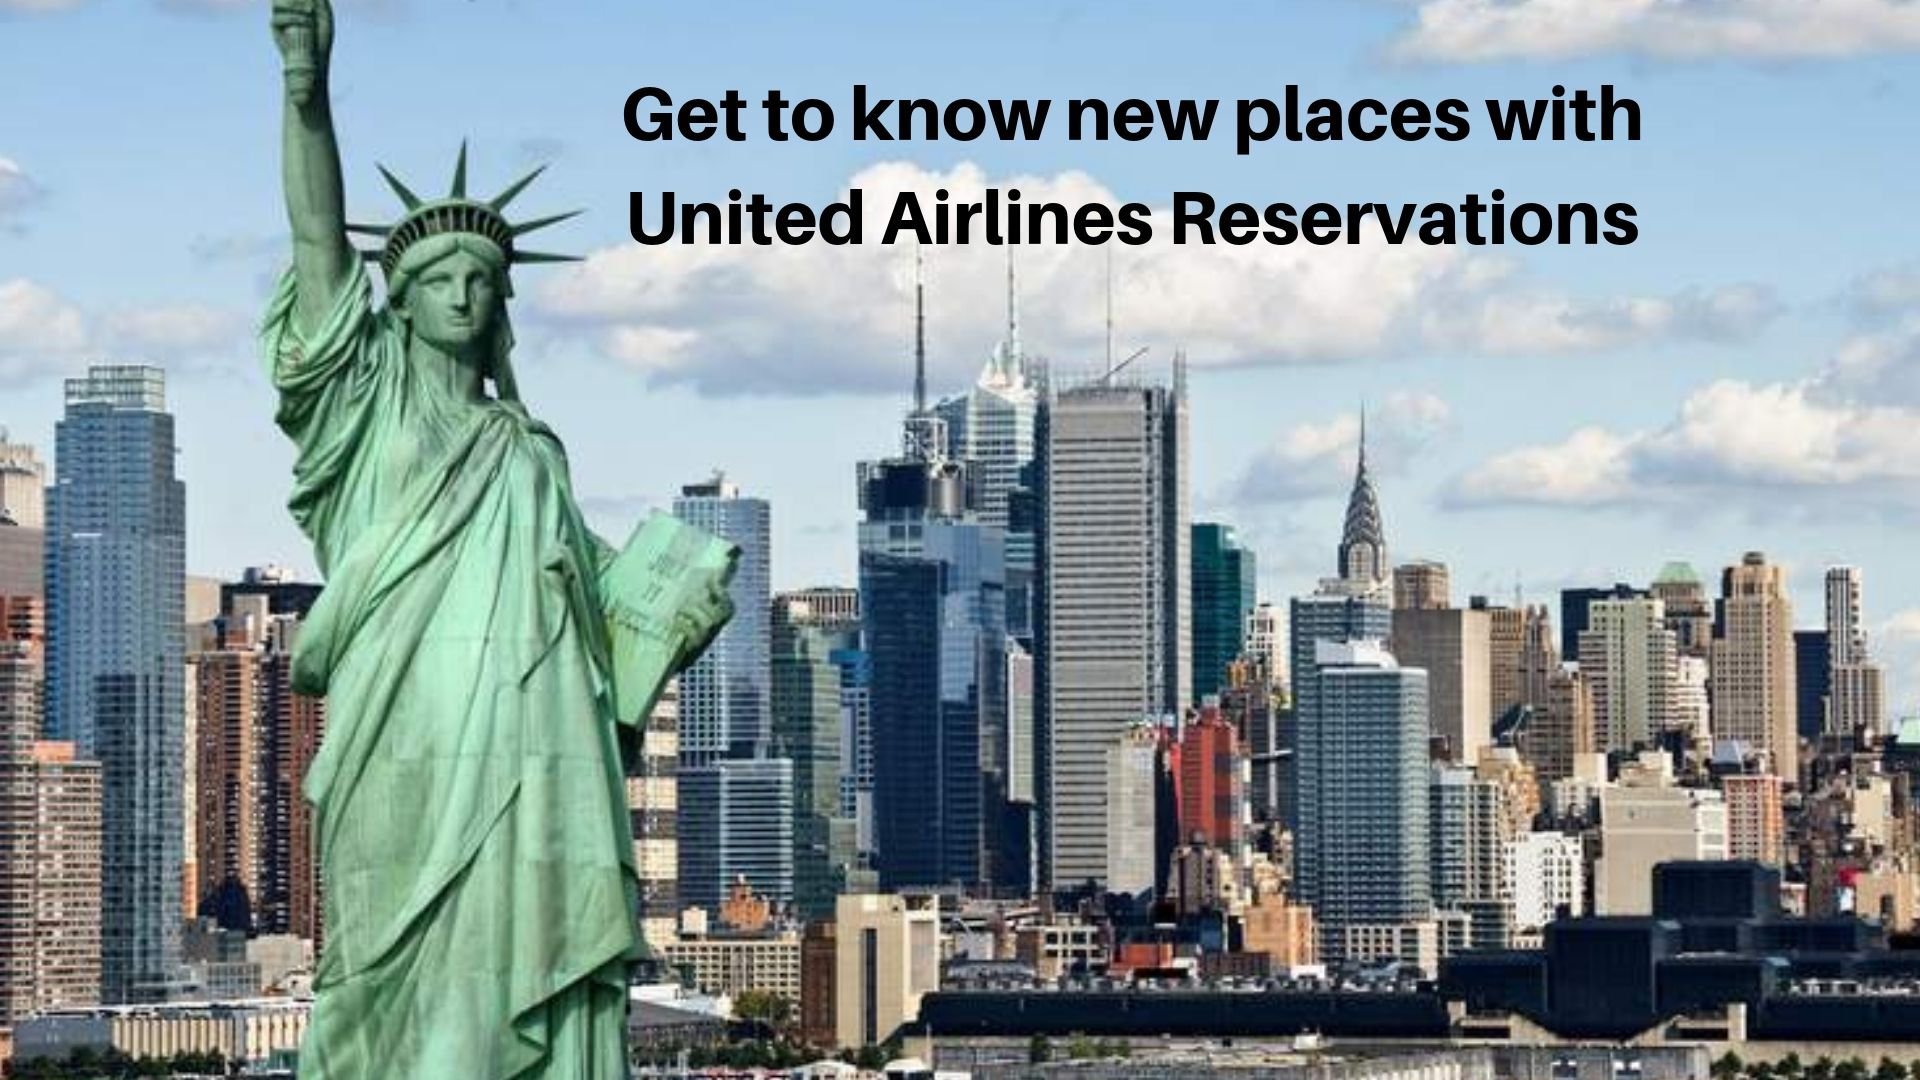 Get to know new places with United Airlines Reservations